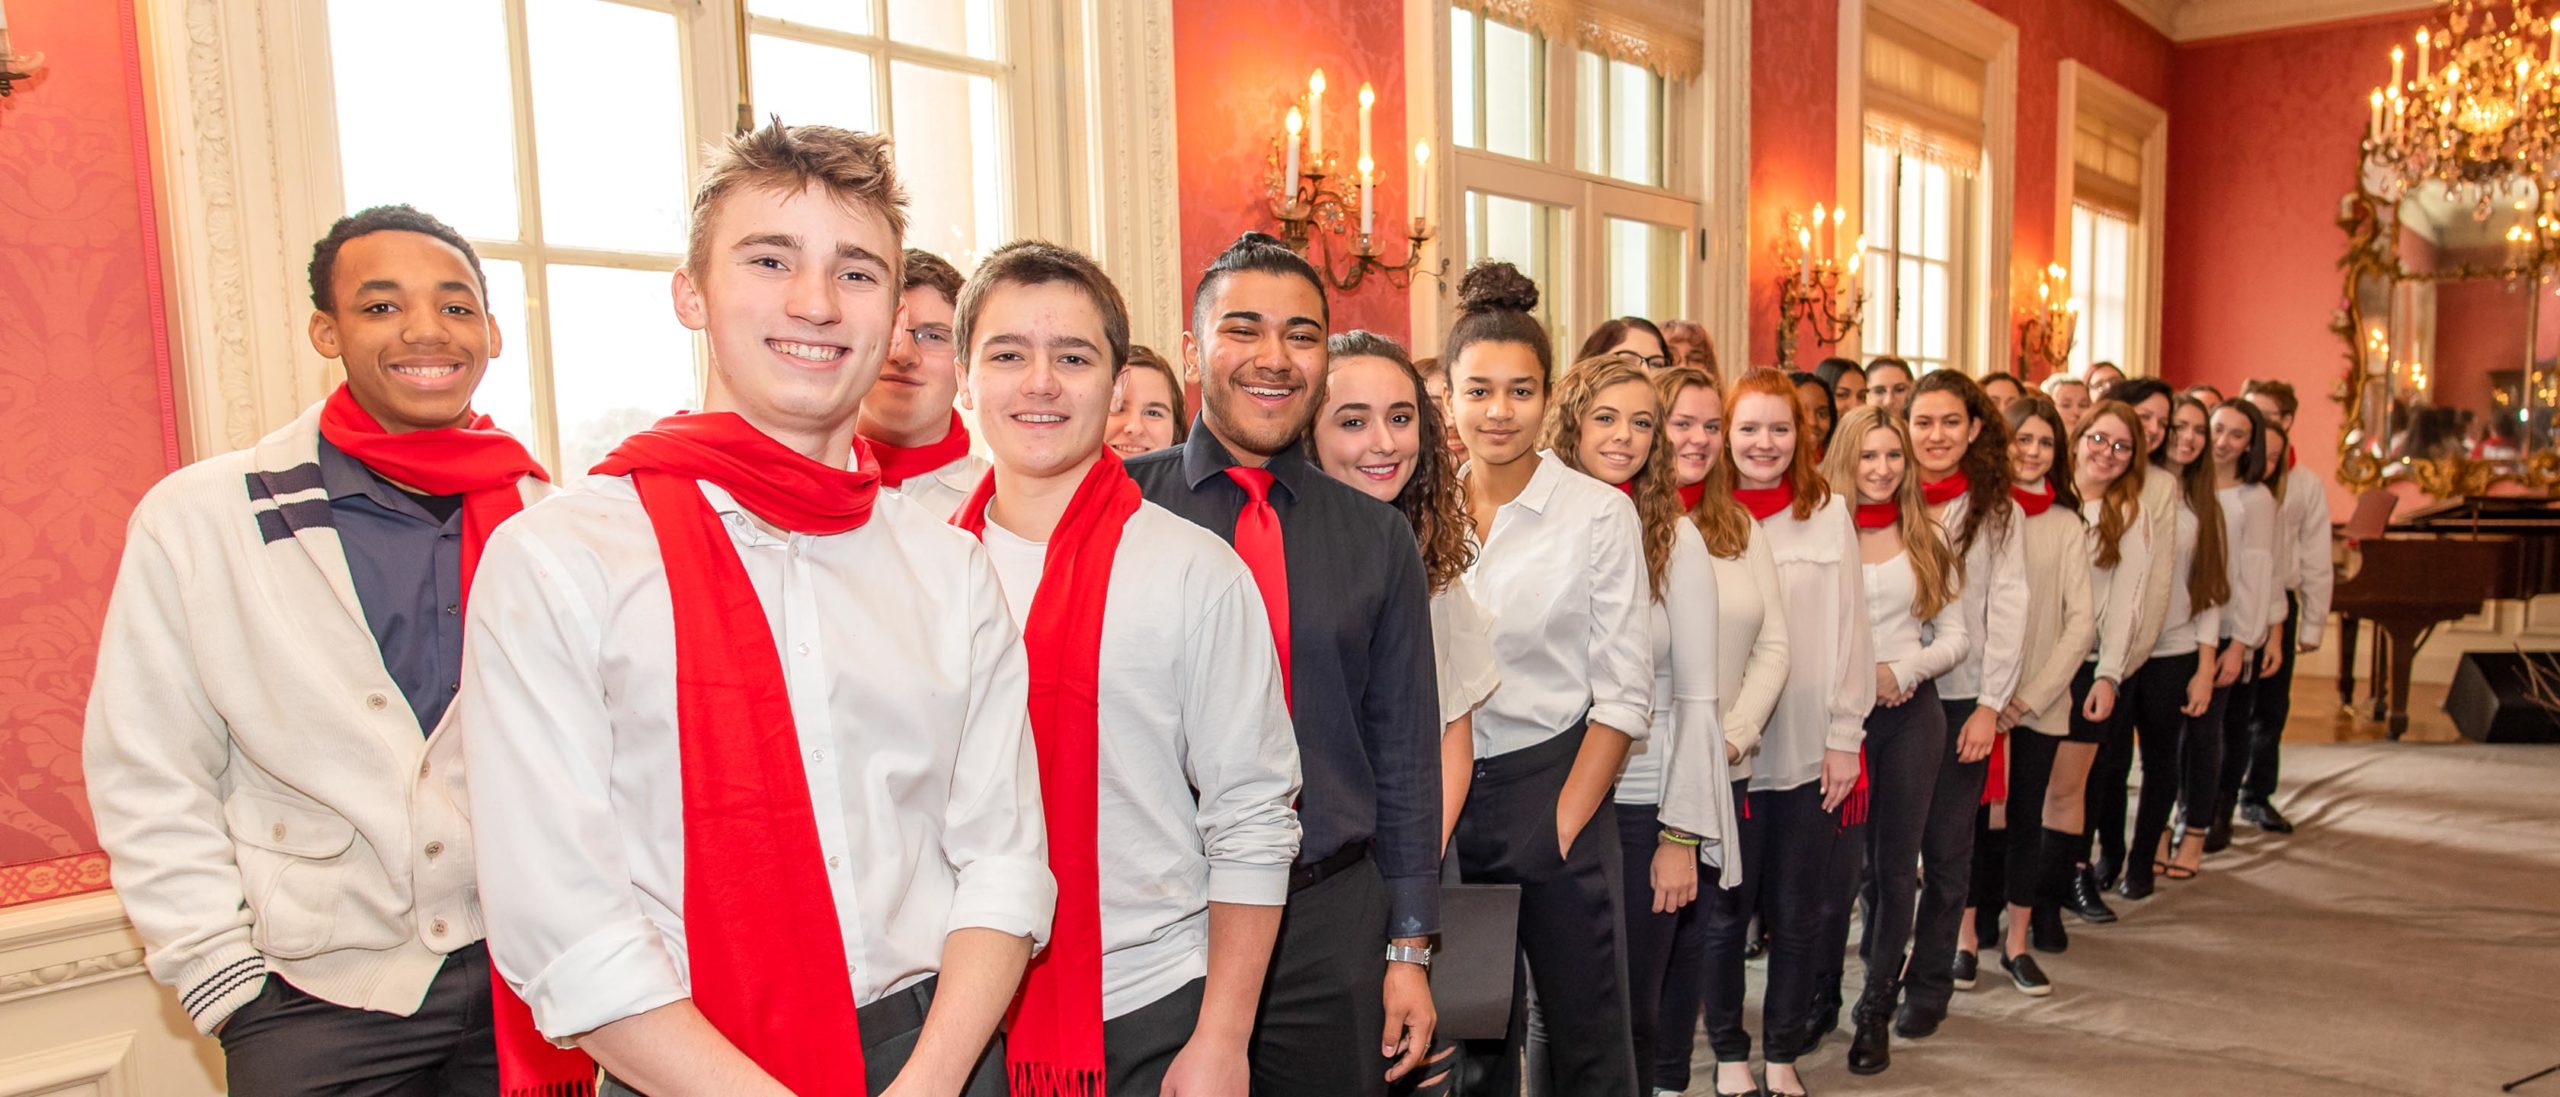 Group of students wearing red scarves at a function where they will be singing carols